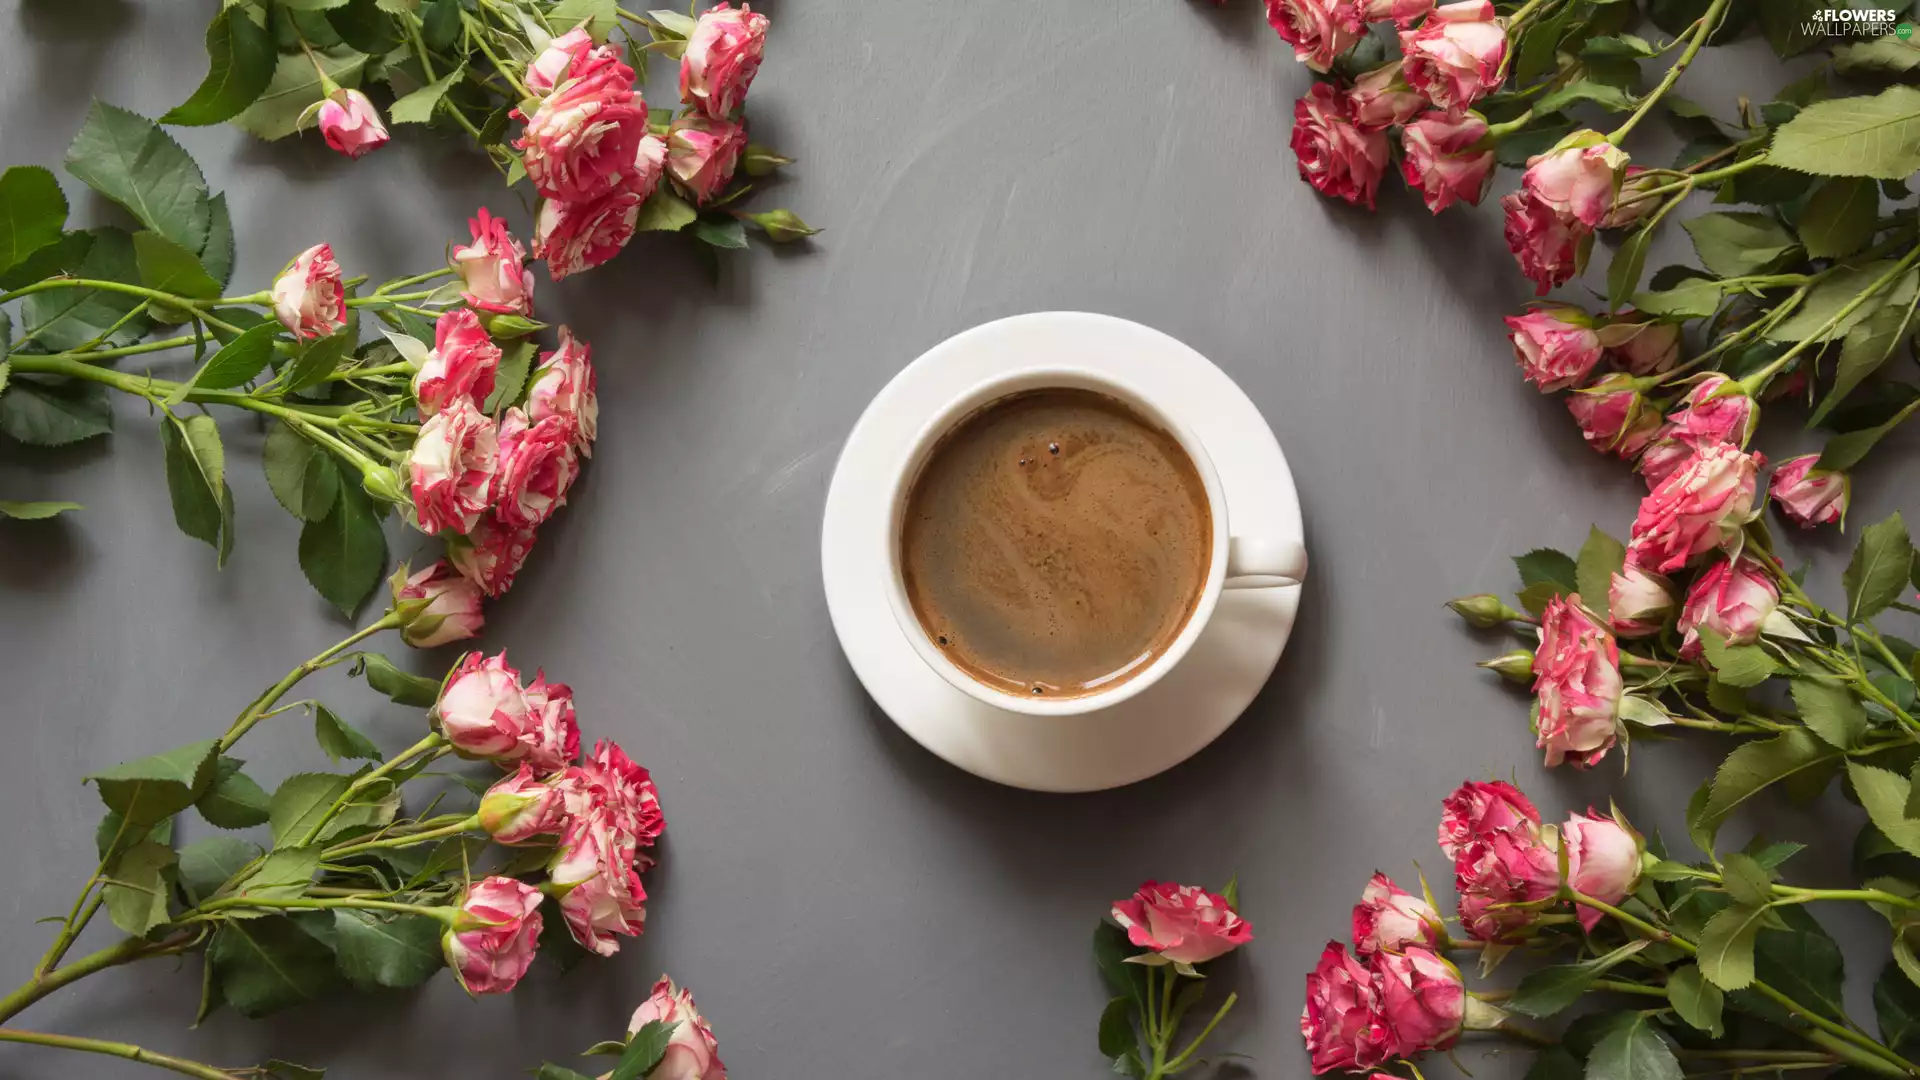 Flowers, cup, coffee, roses